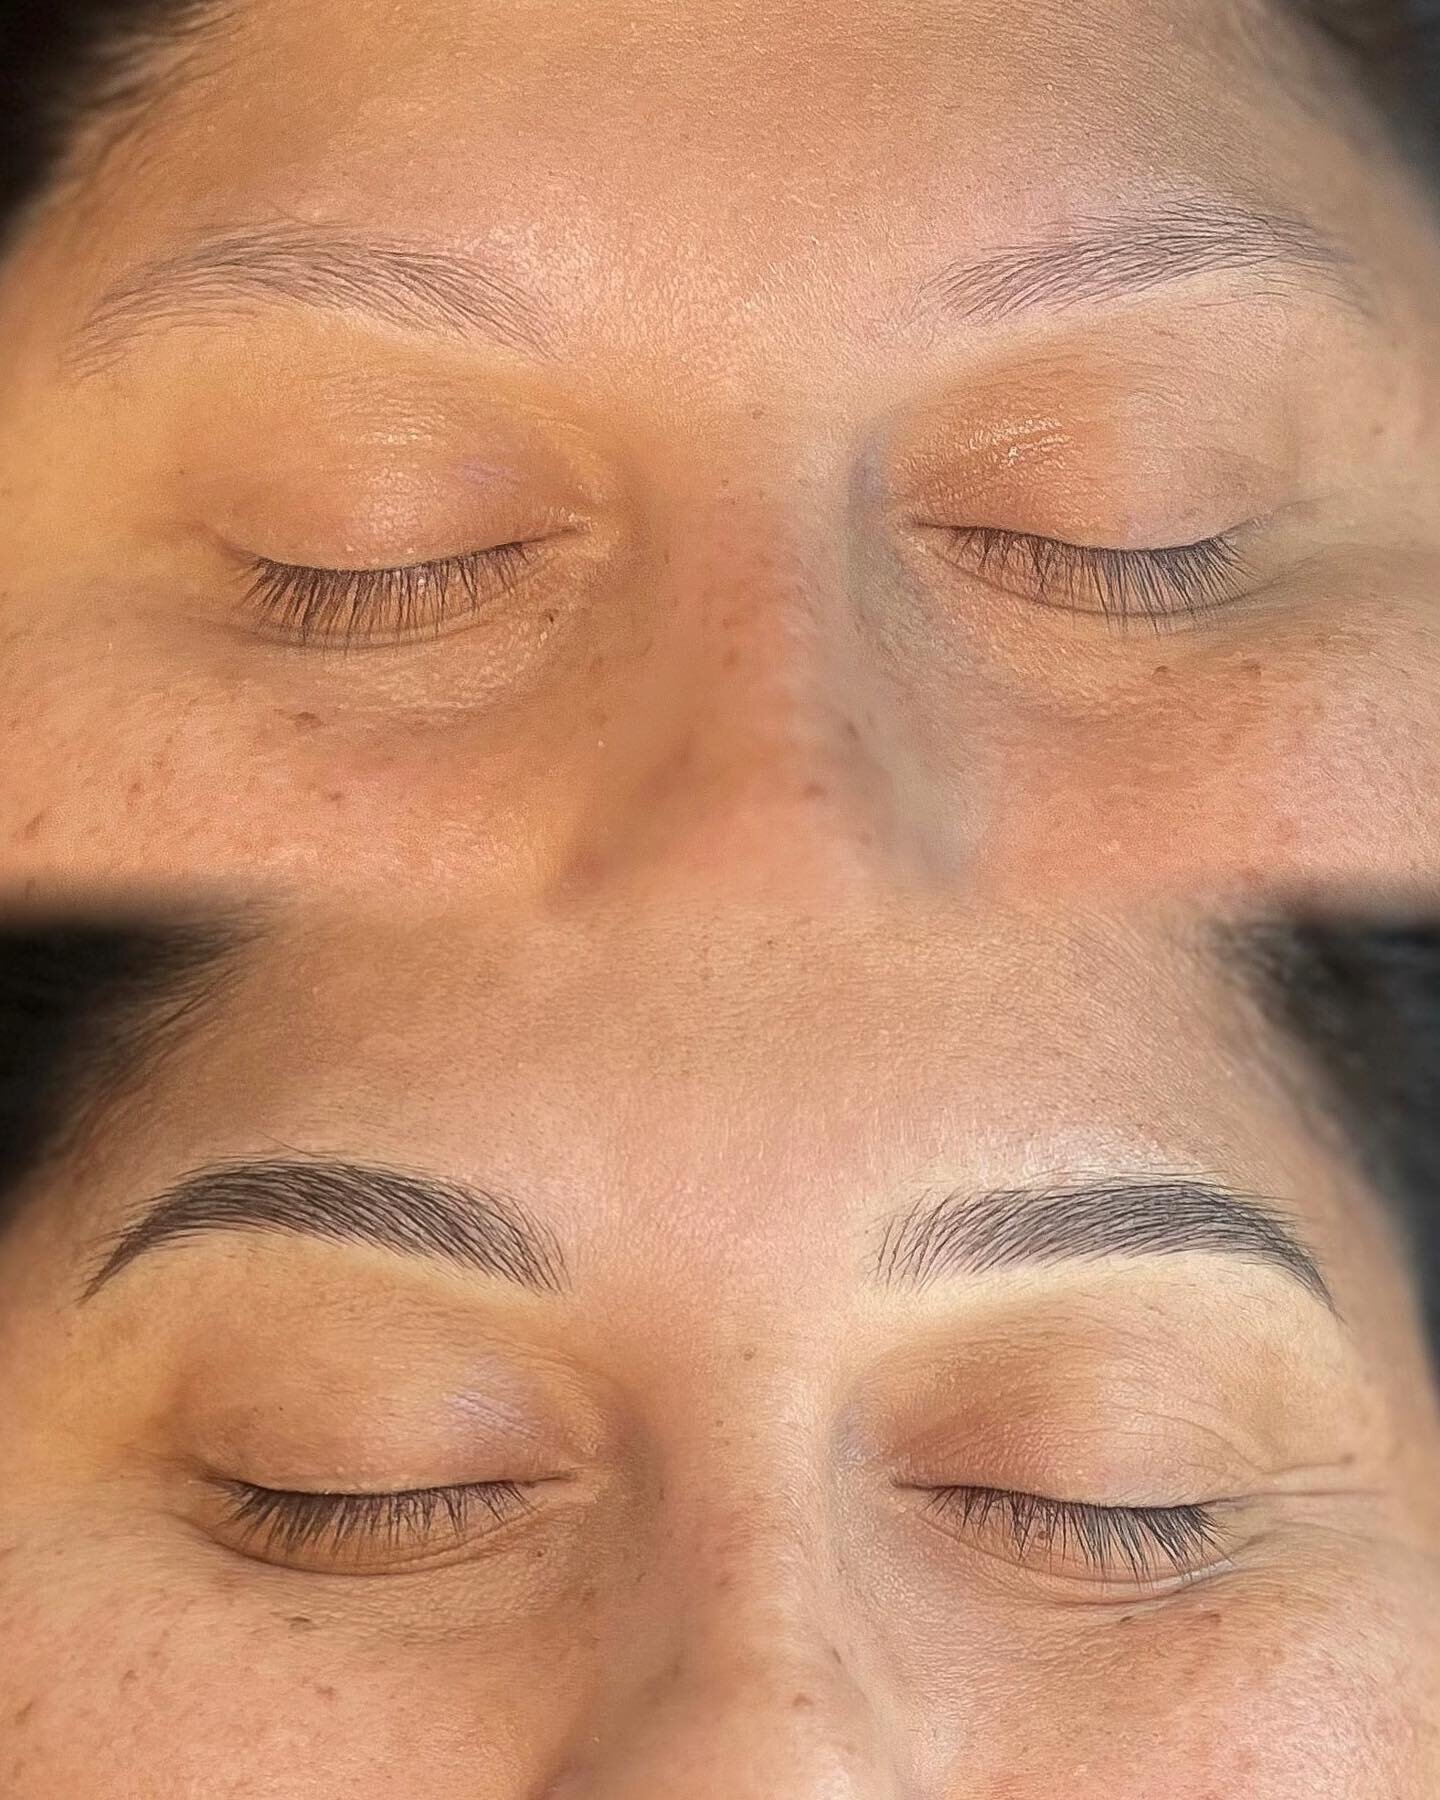 I LOVED creating these combo brows!! 🤩 What a big transformation for this client. We are both so happy with how they turned out✨

A combination of microblading and powder shading was used for this before + after 🪄

.
.
.
.
.
.
.
.

#microblading #m